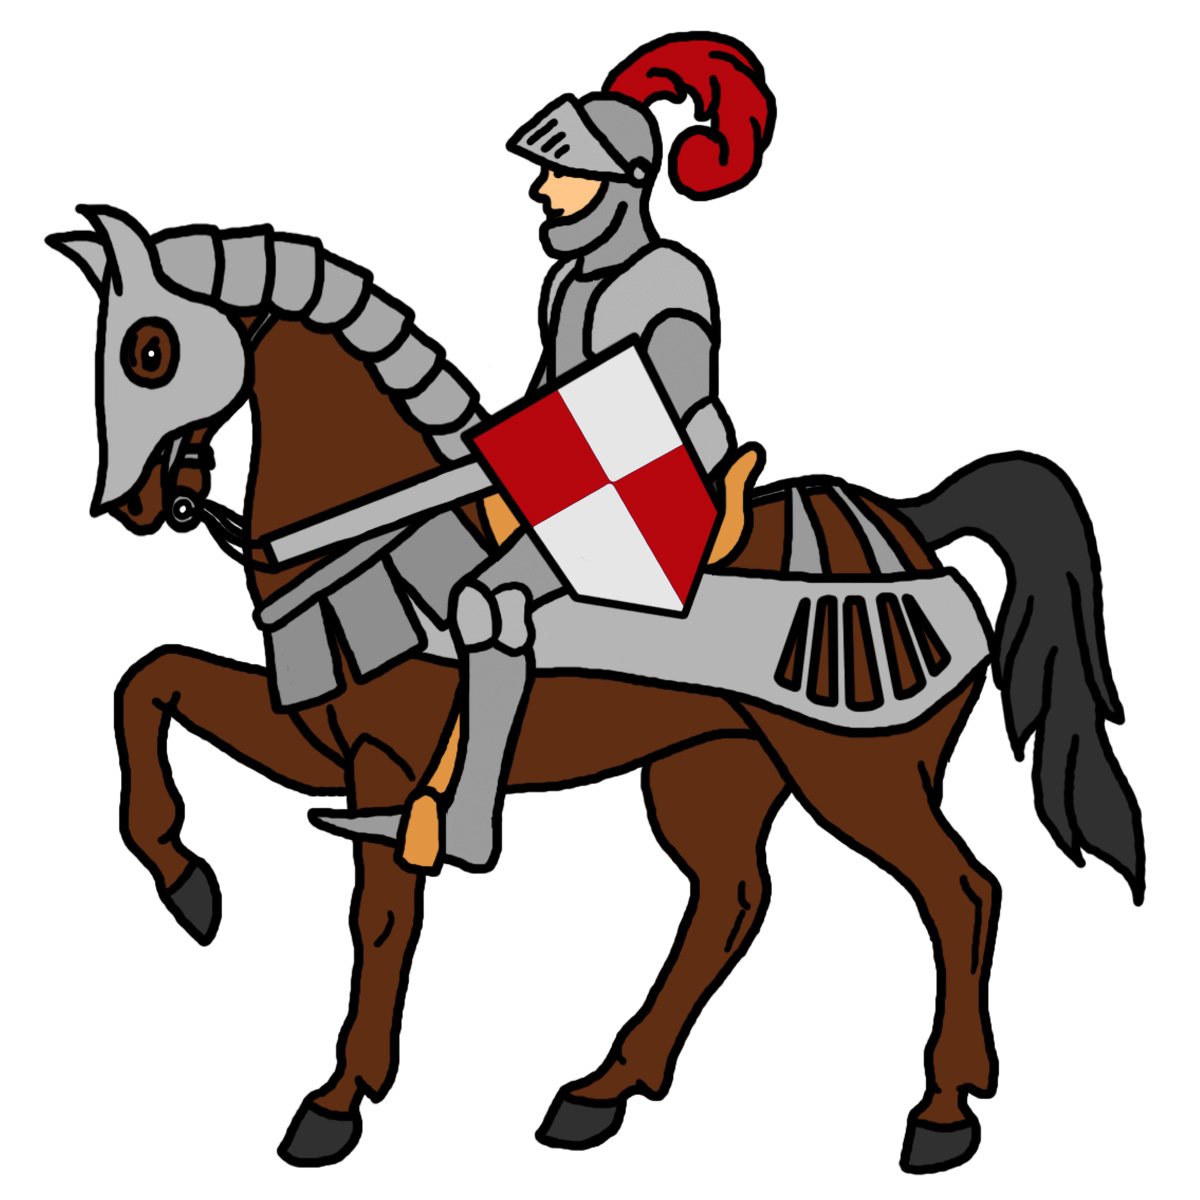 Clip Art For Middle Ages - ClipArt Best